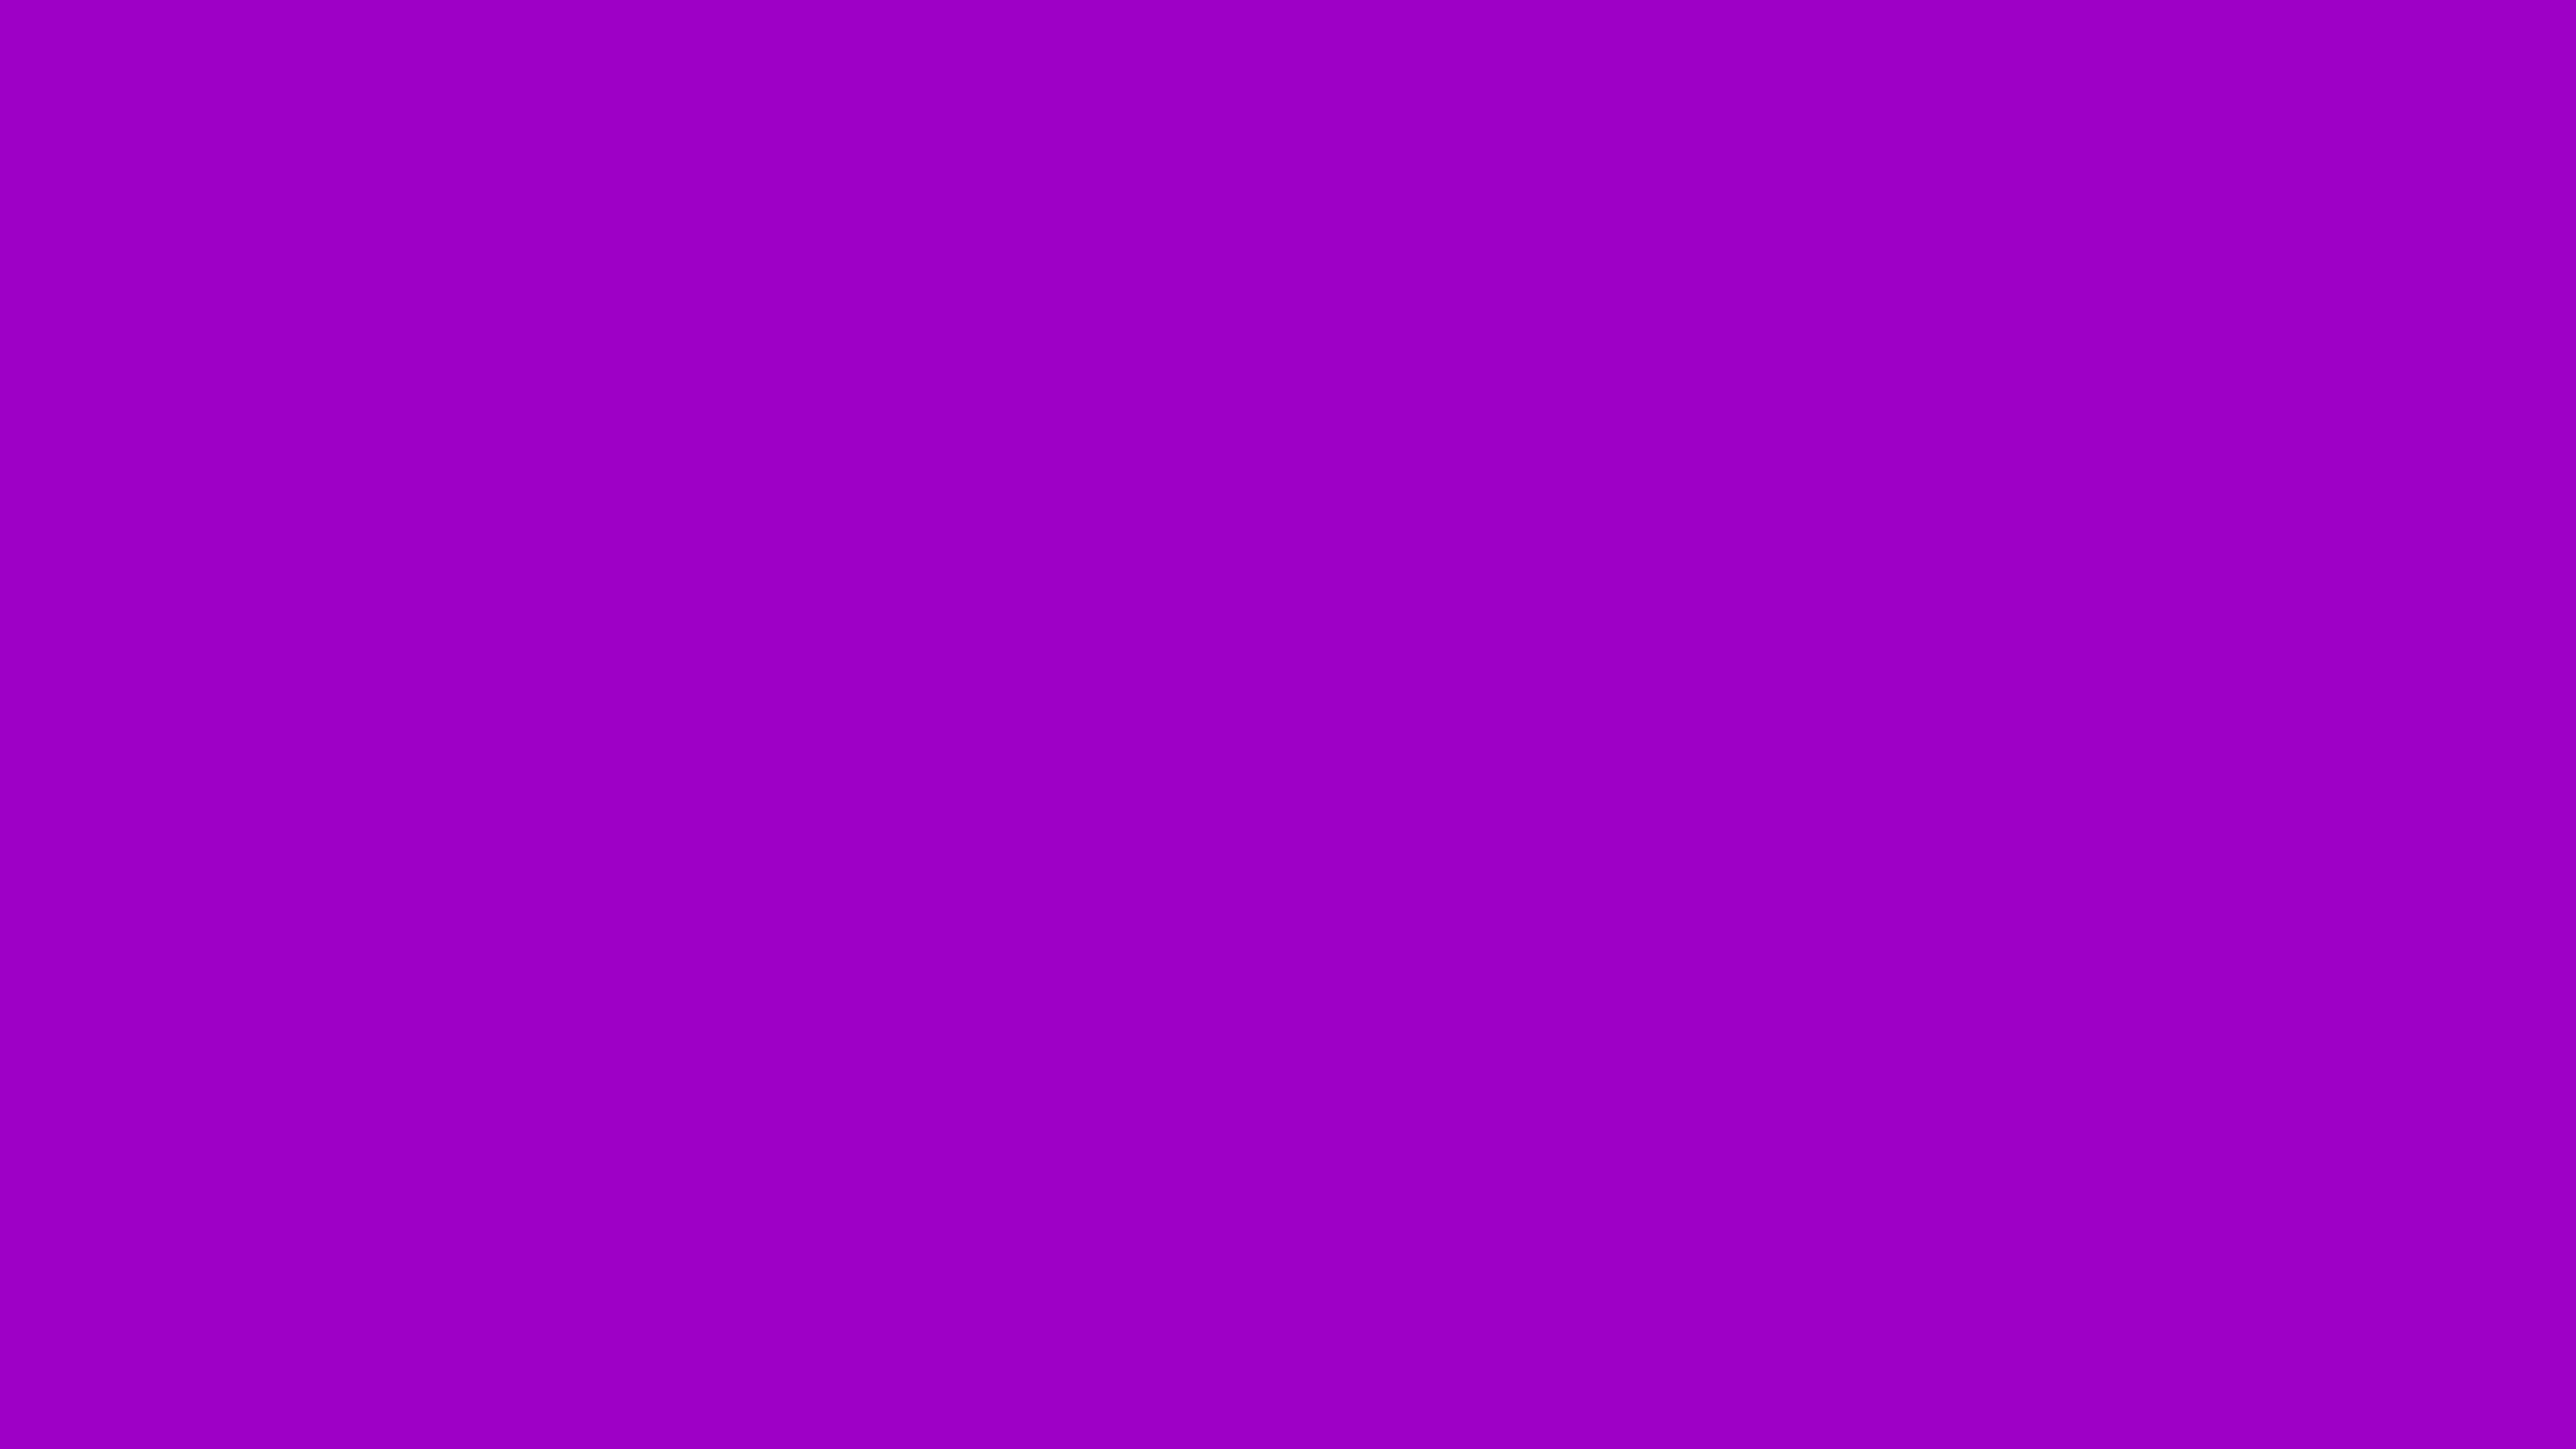 4096x2304 Purple Munsell Solid Color Background